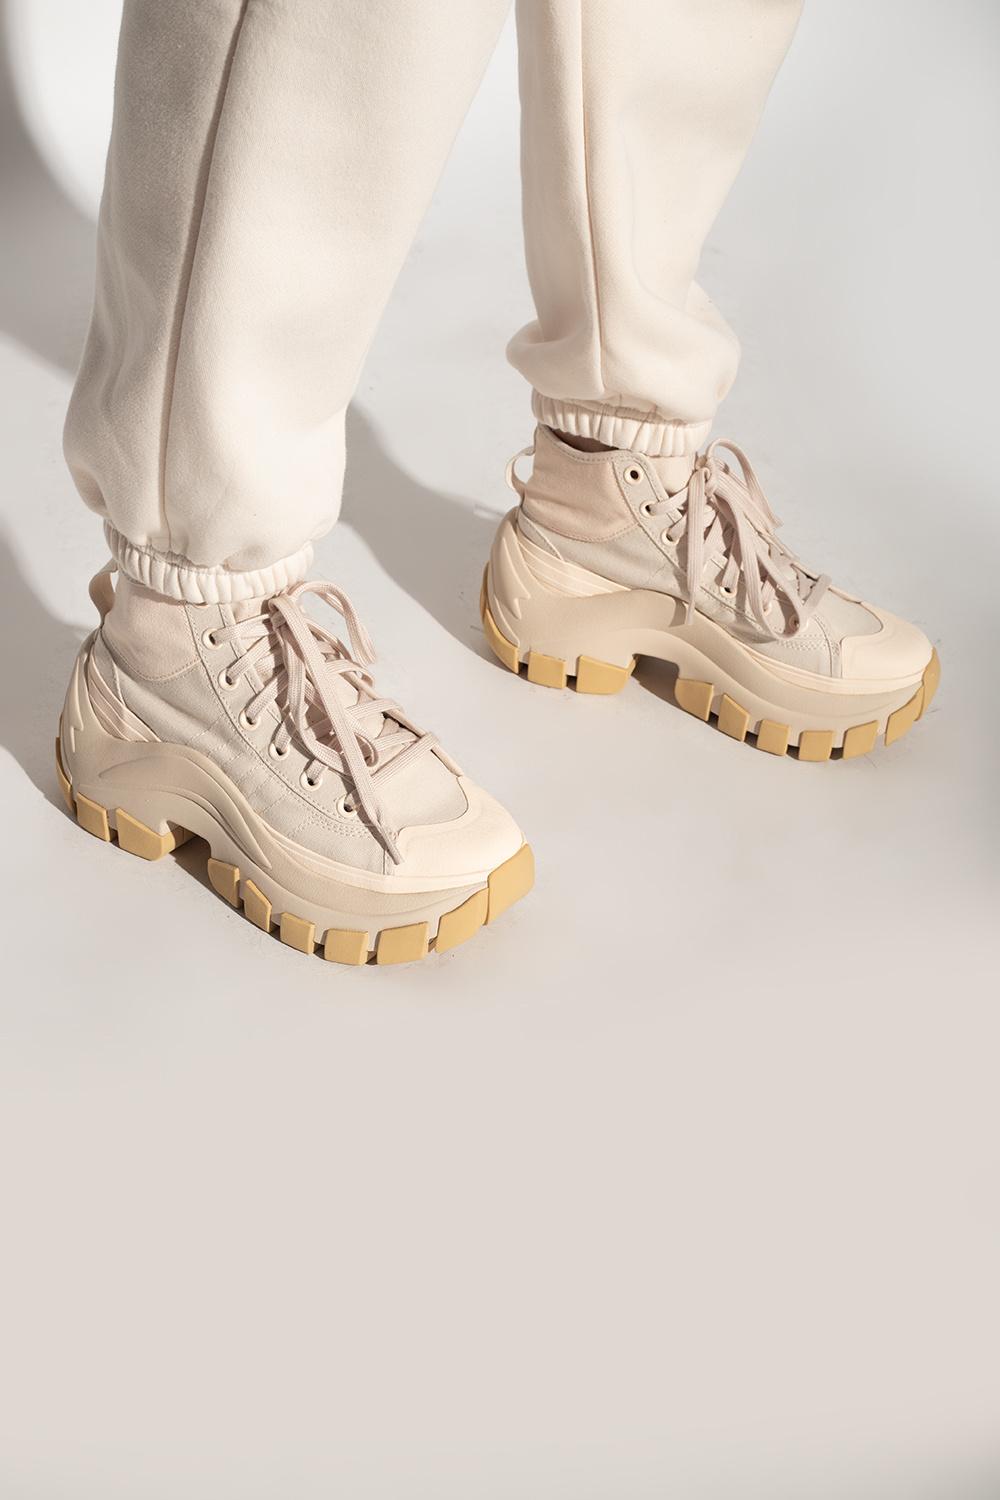 adidas Originals 'nizza High Xy22' Boots in Natural | Lyst